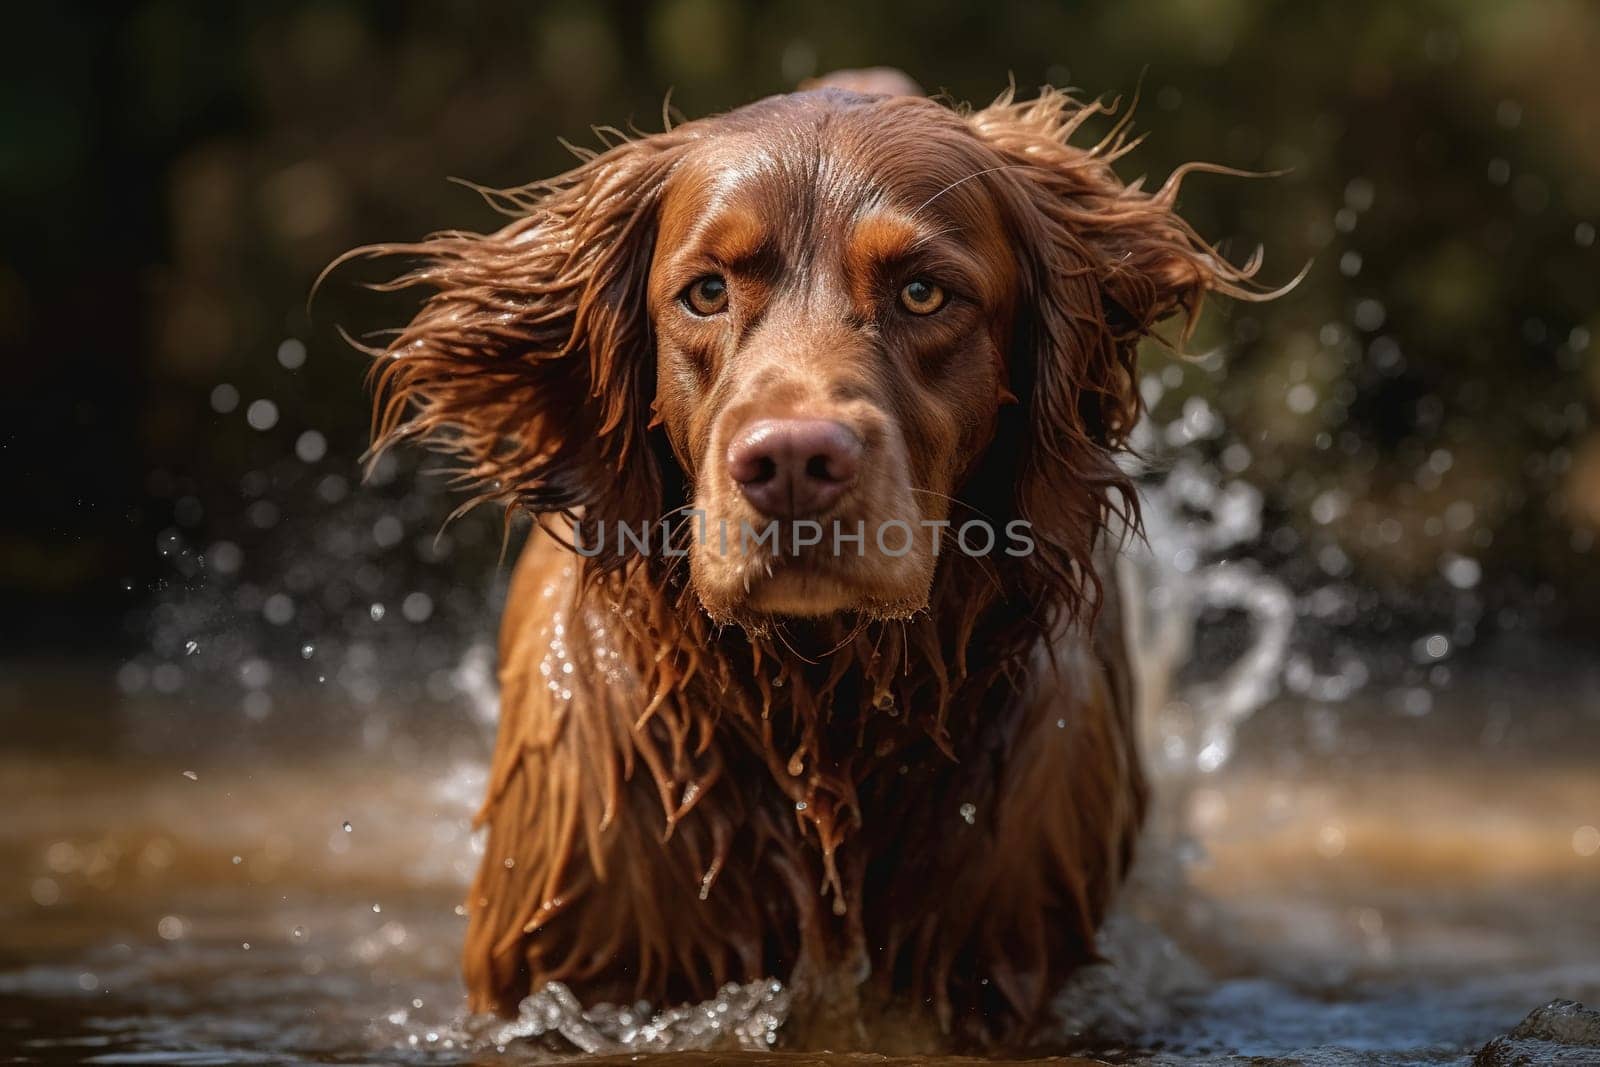 Dog swimming creates splashes and drops of water everywhere.